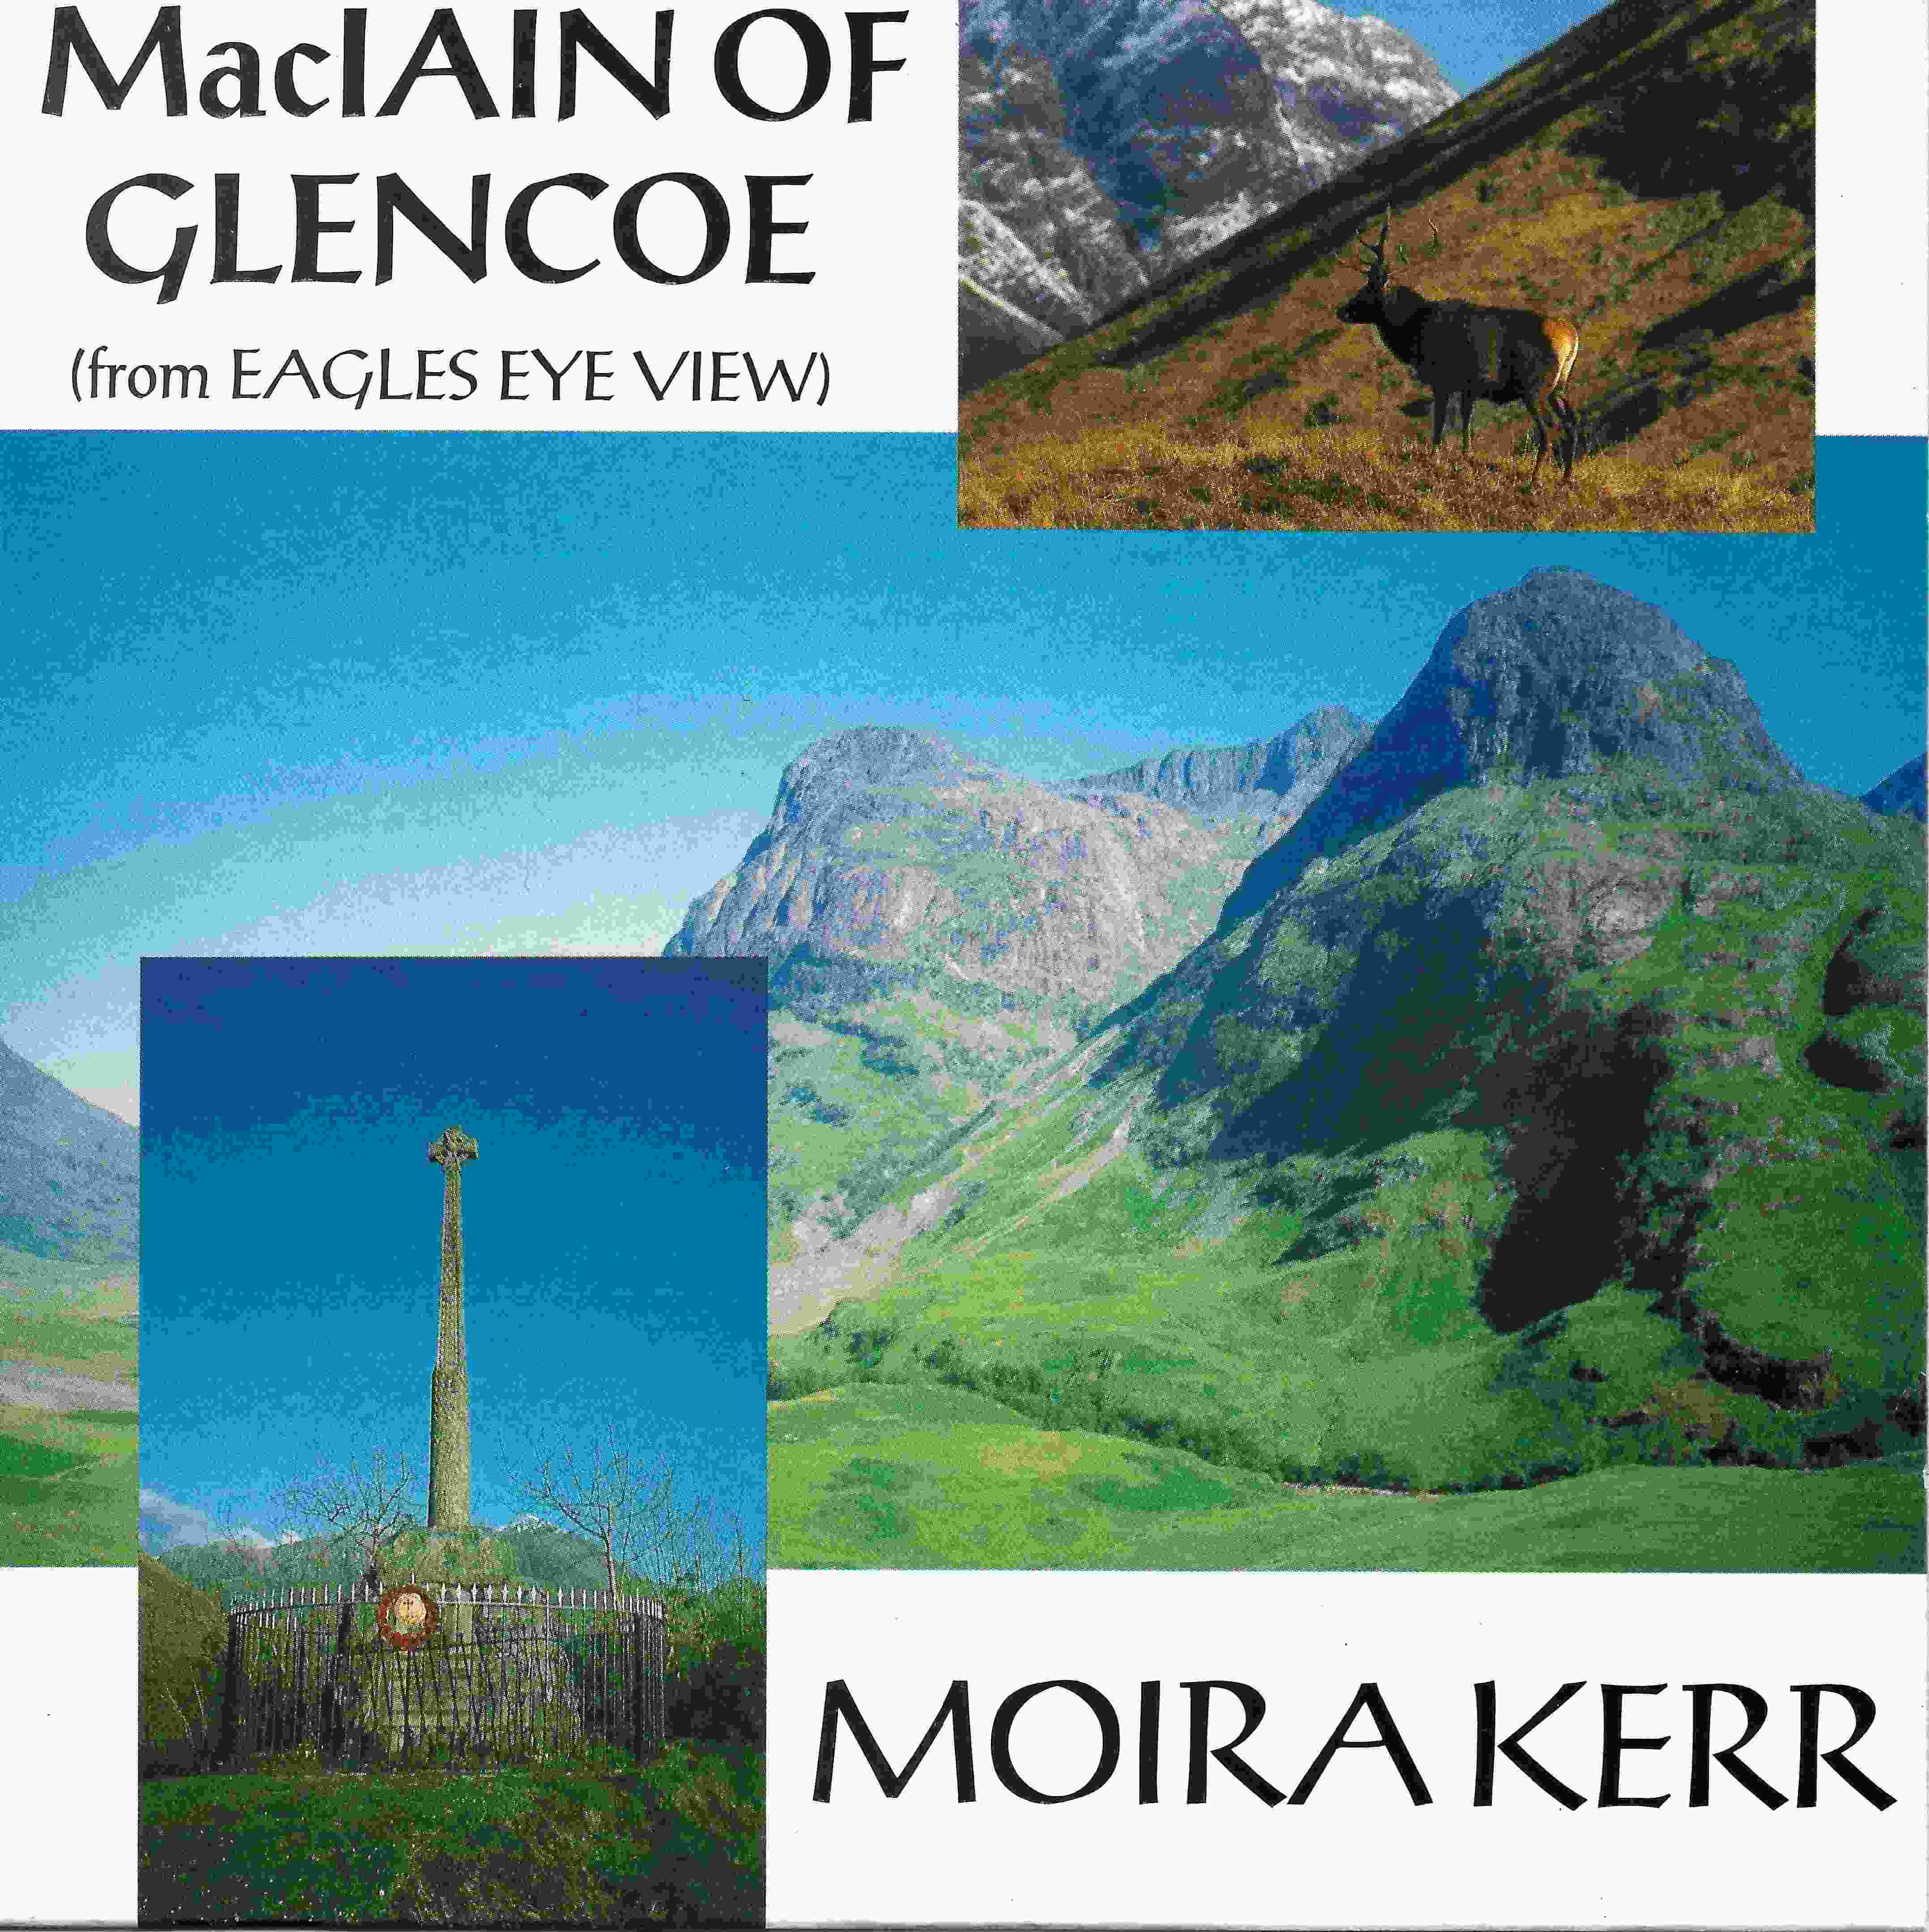 Picture of RESL 231 MacIain of Glencoe (Eagles eye view) by artist Moira Kerr from the BBC records and Tapes library